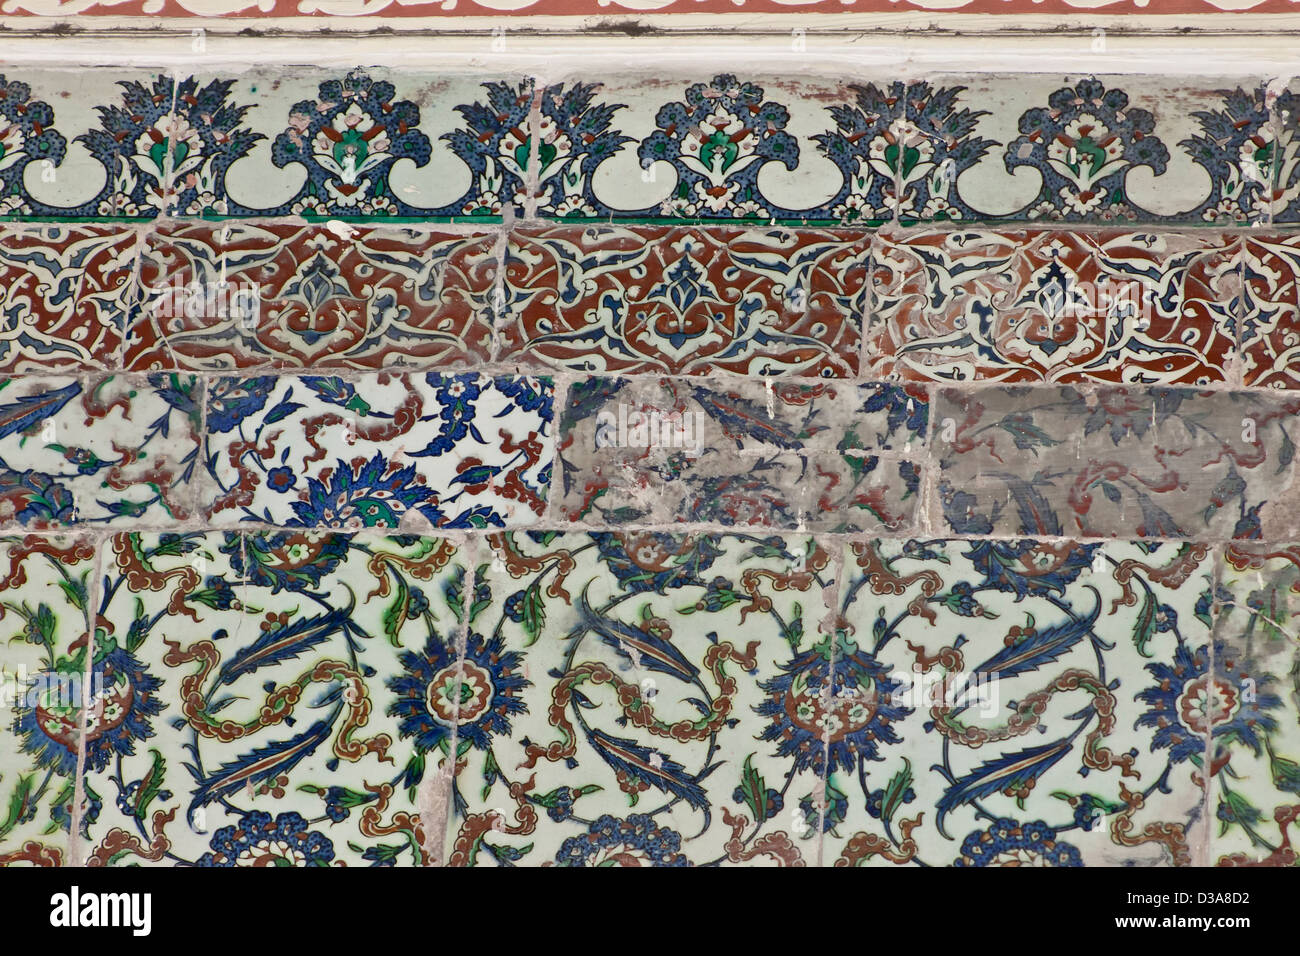 Very old tiles. Stock Photo